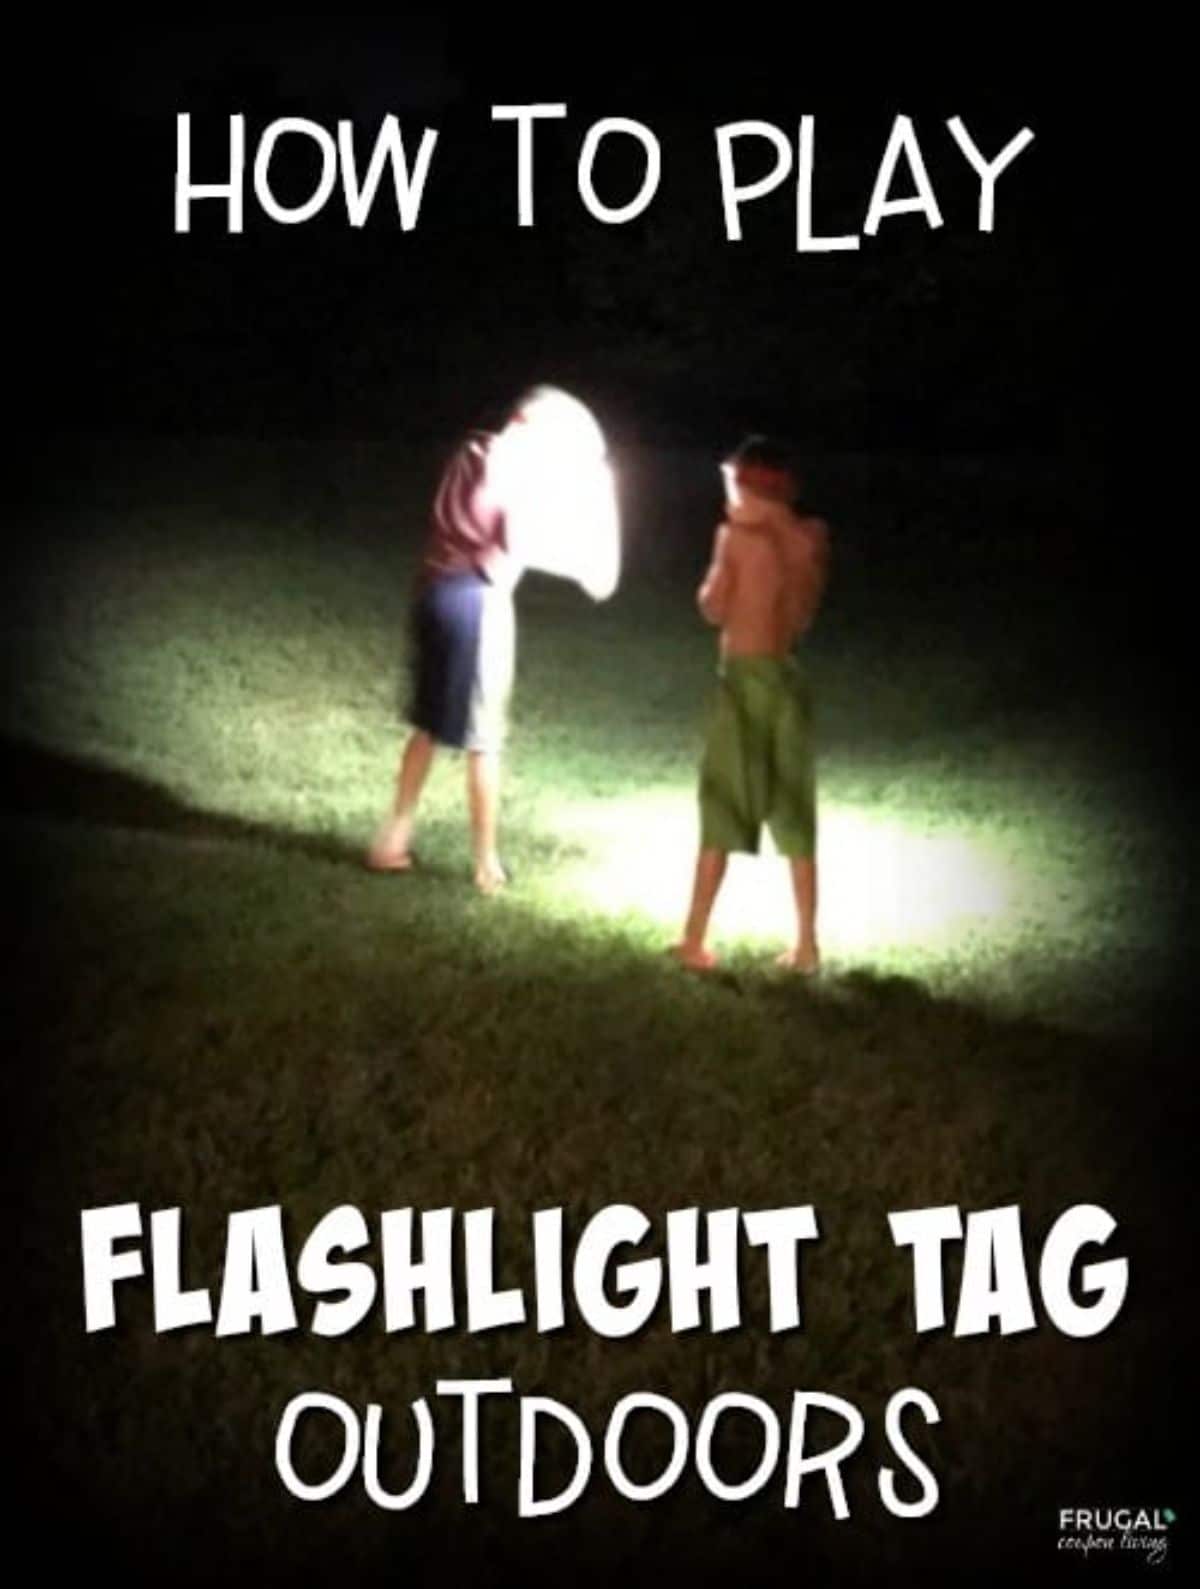 the text reads "How to play flashlight tag outdoors" and the image is of 2 children standing in the dark holding a flashlight